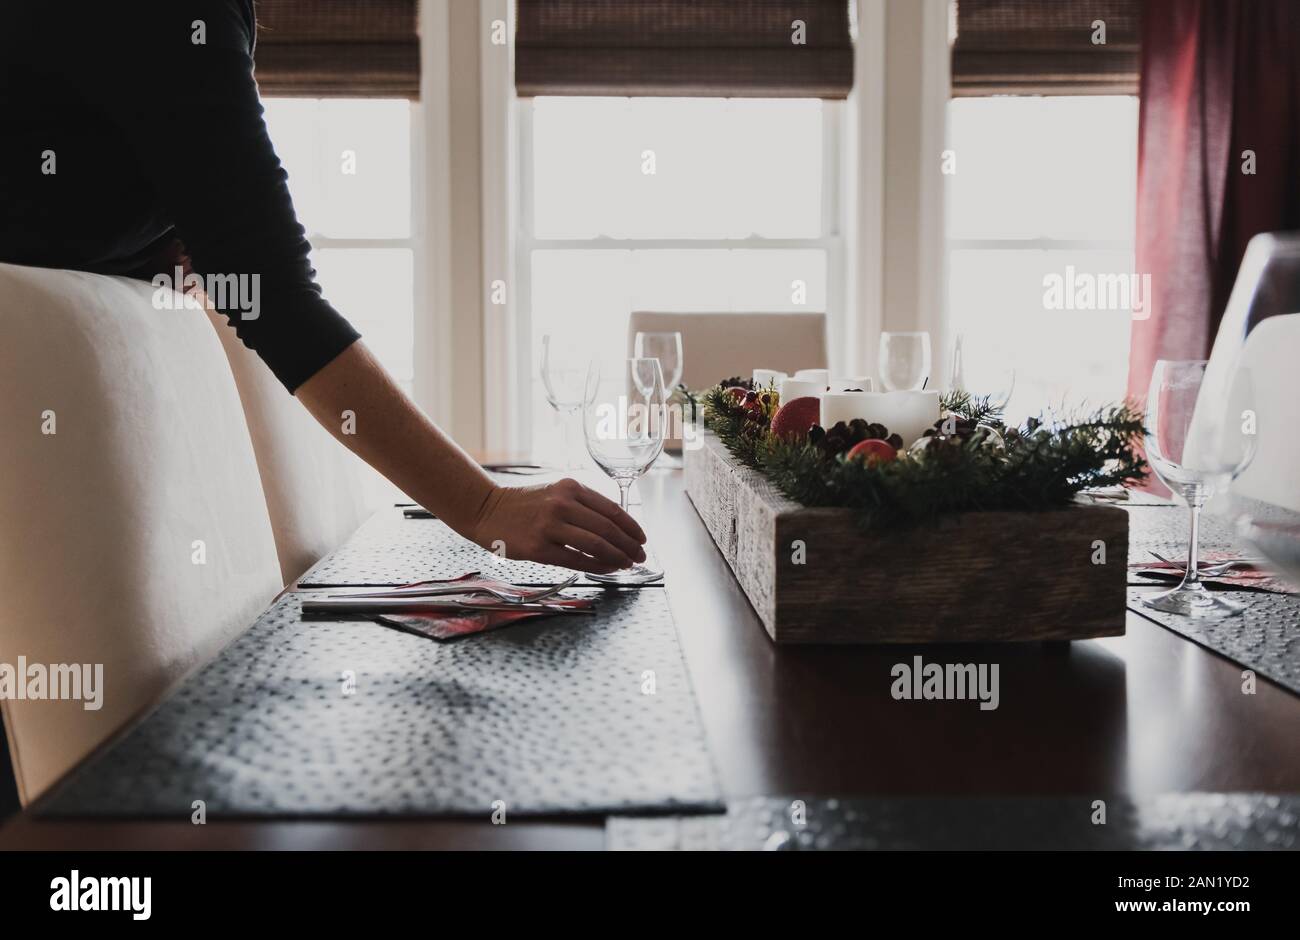 Close up of hand placing wine glass on place setting of dining table. Stock Photo